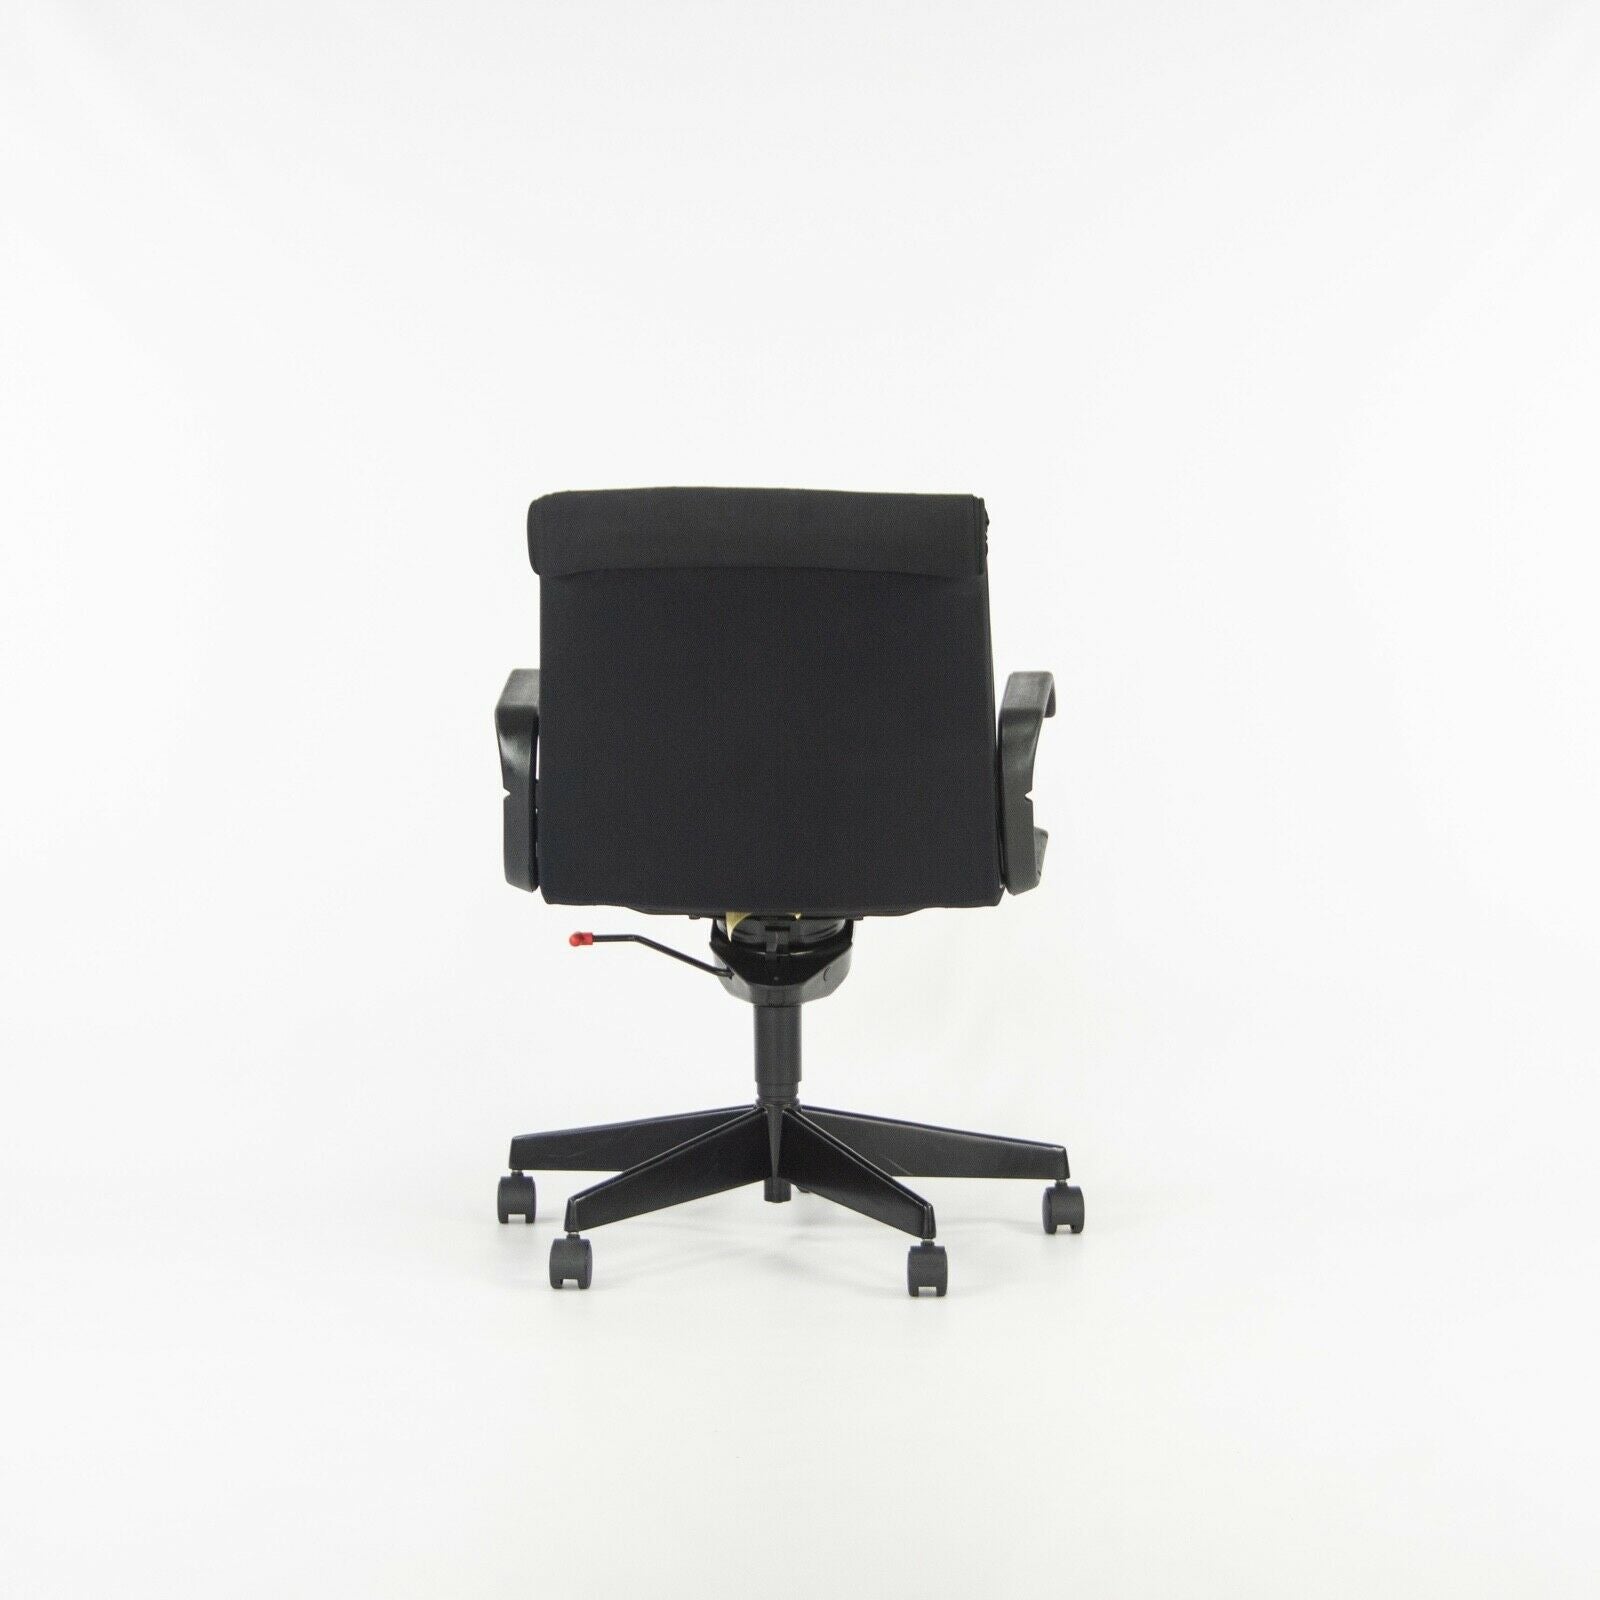 1990s Richard Sapper for Knoll Office / Desk Chair with Black Fabric and Frame